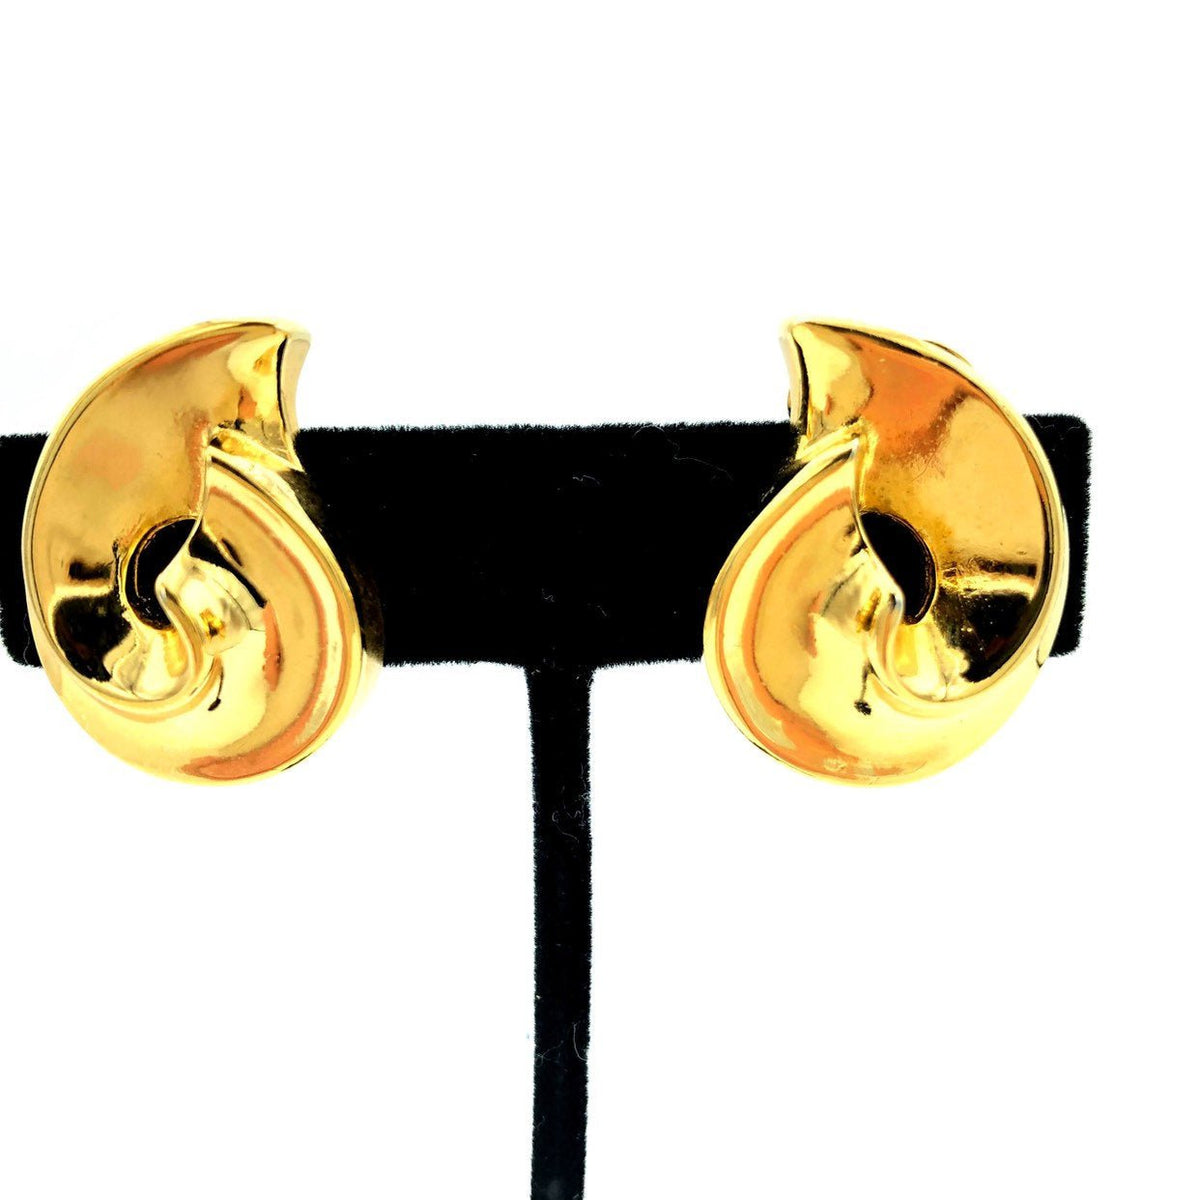 Christian Dior Classic Gold Swirl Vintage Clip-On Earrings - 24 Wishes Vintage Jewelry